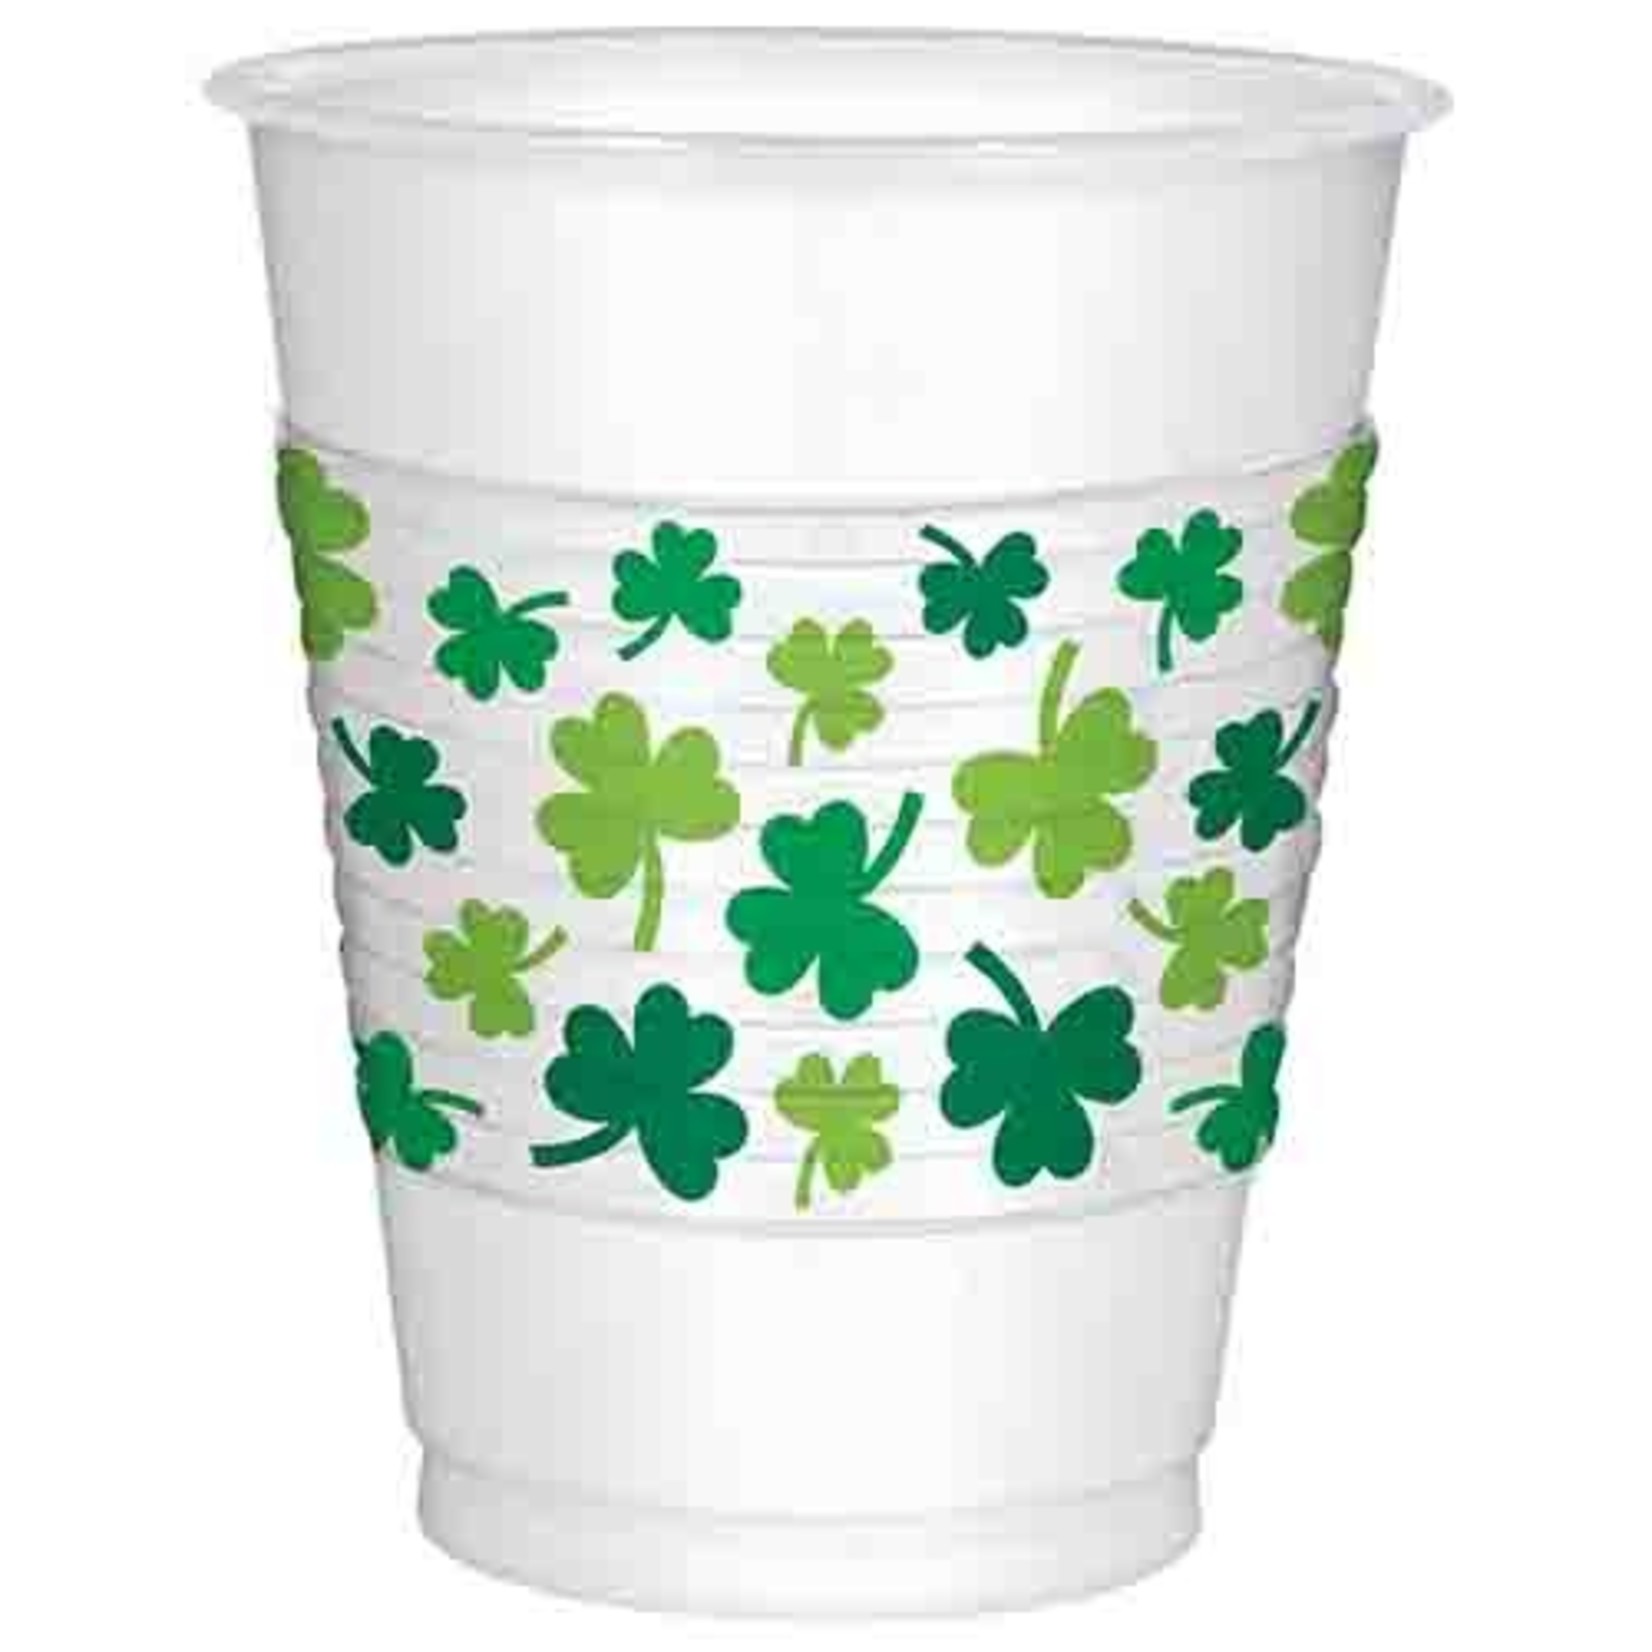 Amscan 16oz. St. Patrick's Day Party Cups - 25ct.